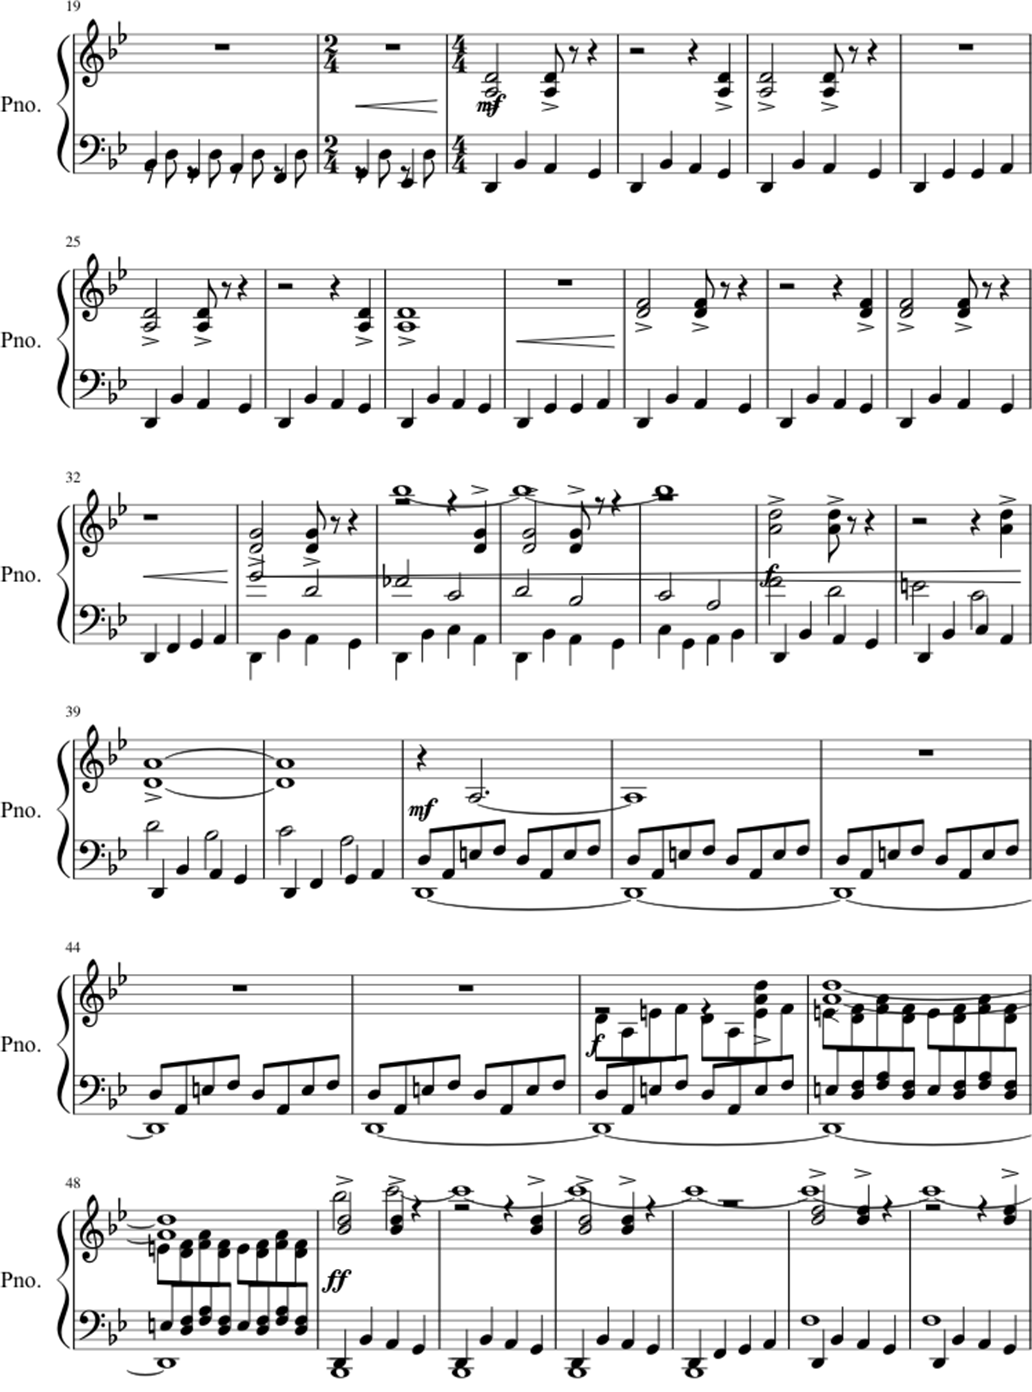 A knife in the dark sheet music notes 2